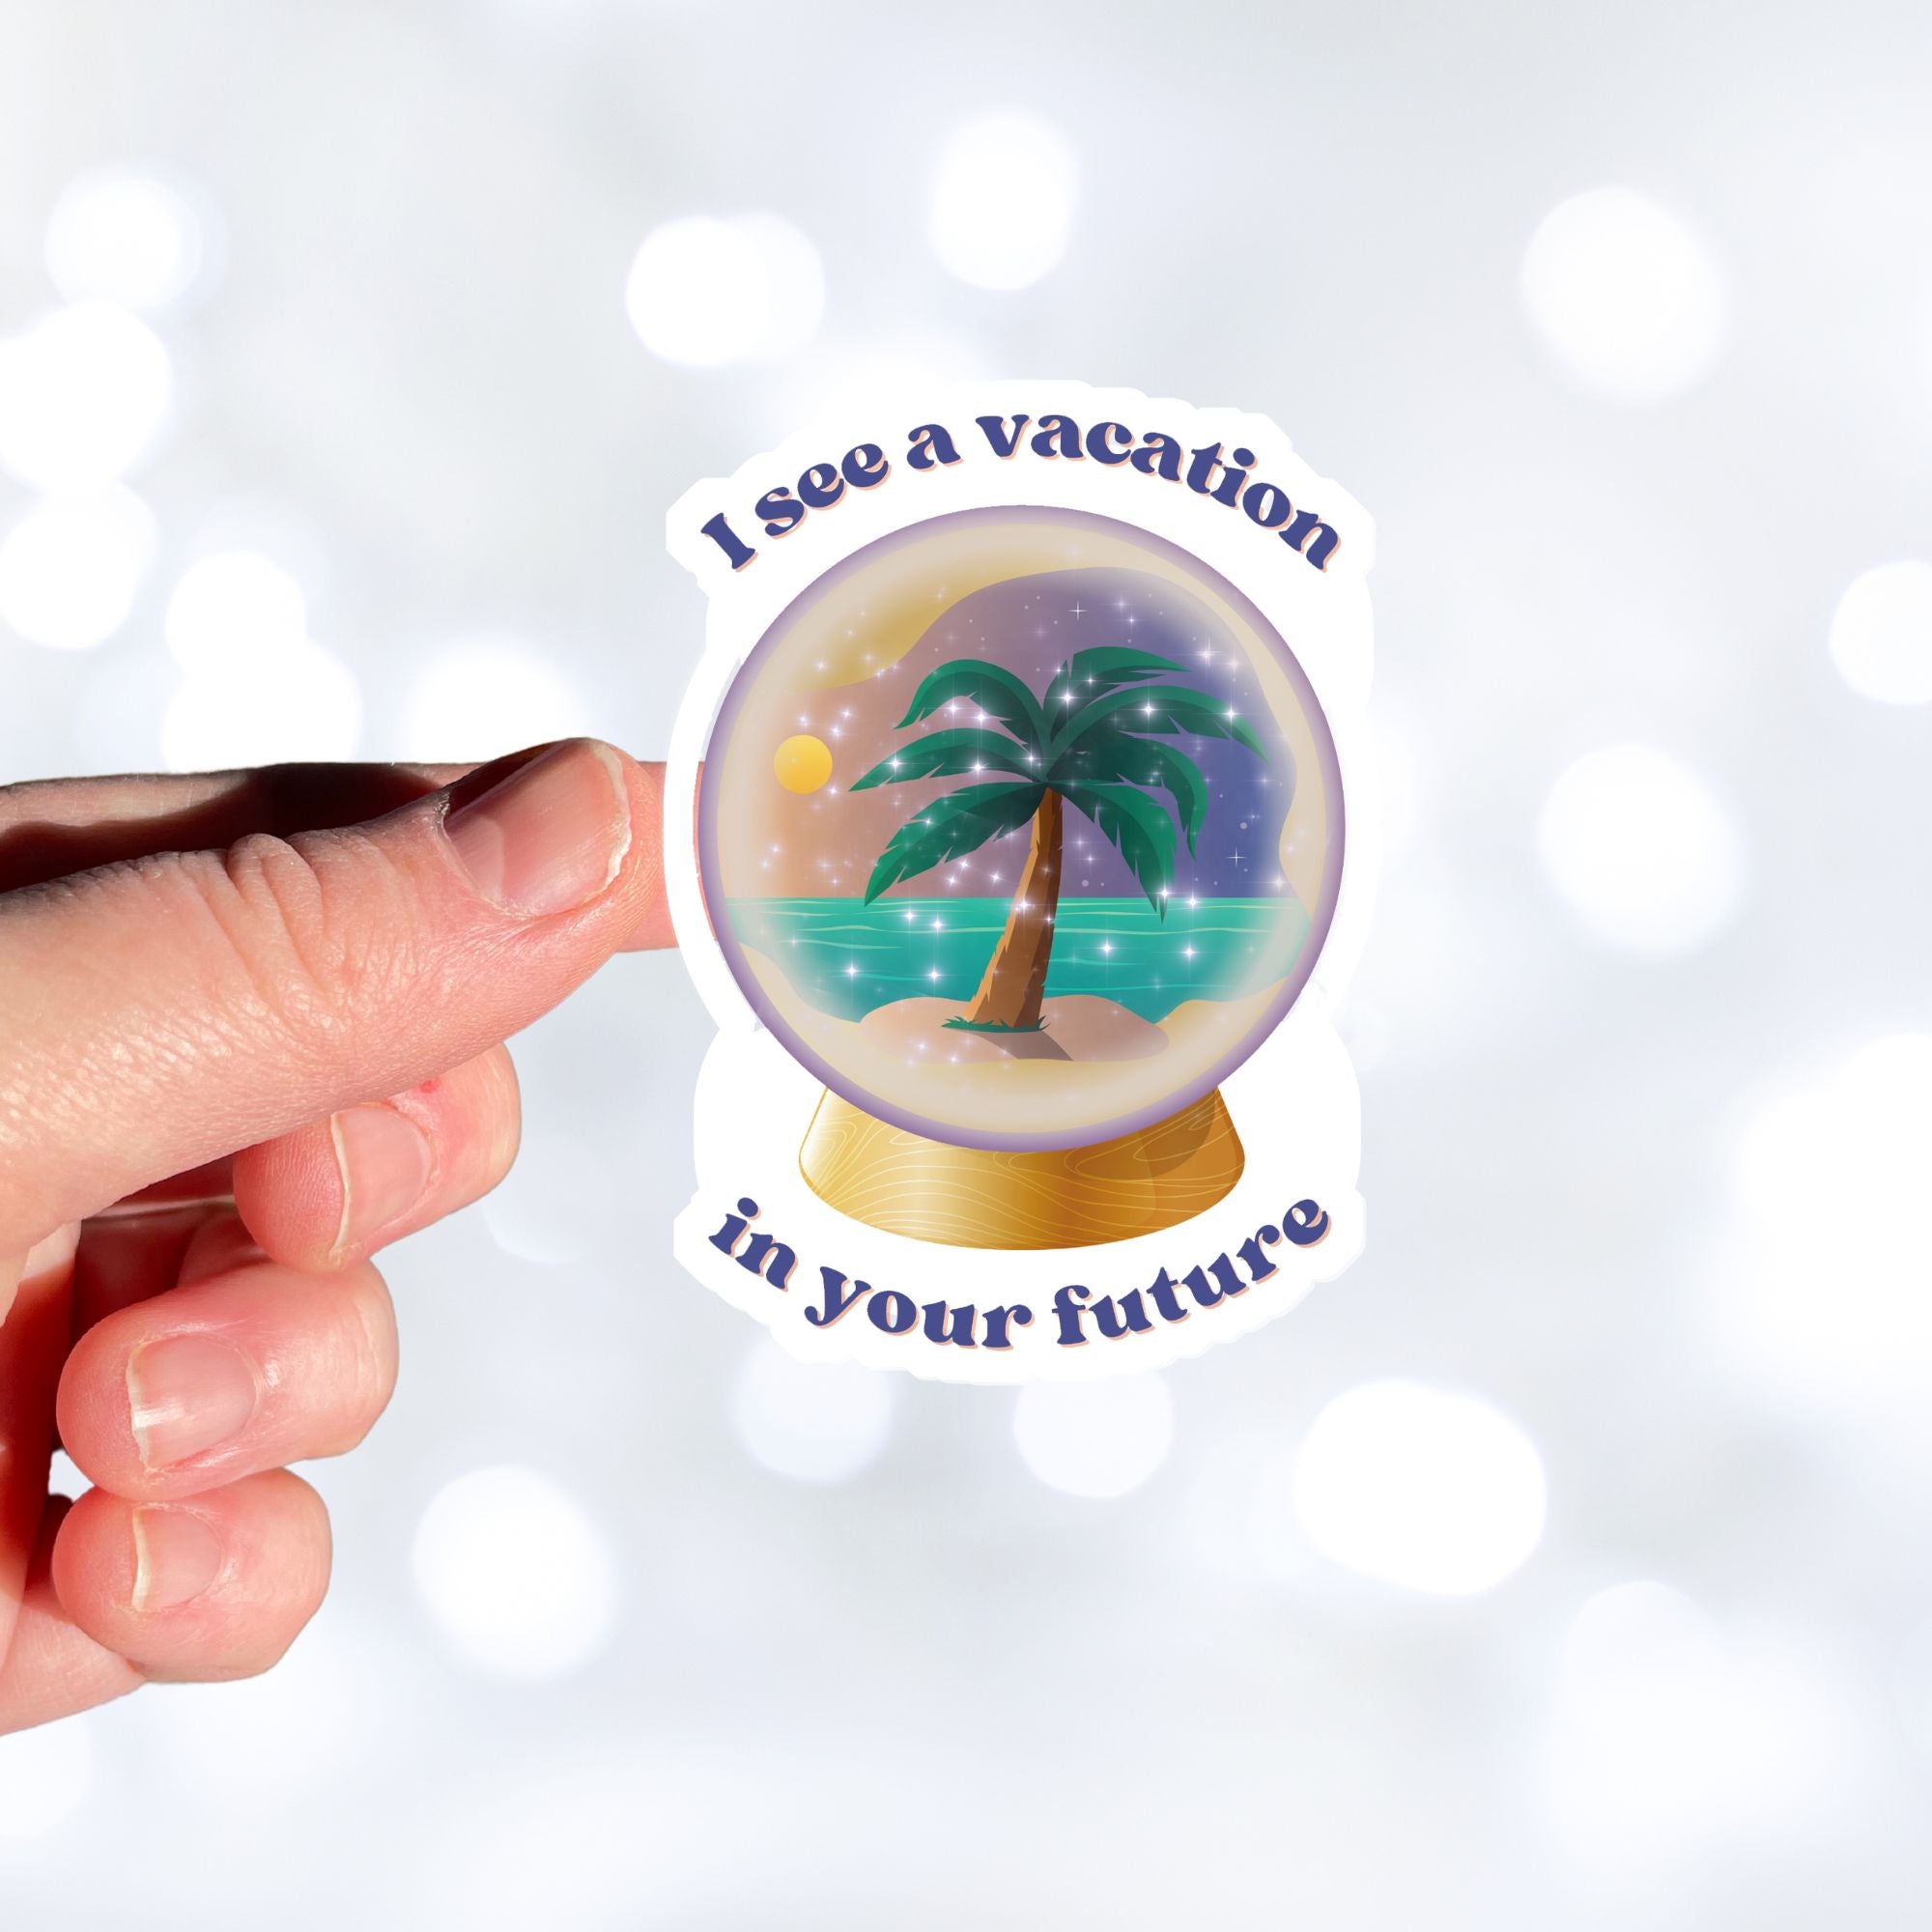 Who wouldn't love a vacation? This individual die-cut sticker shows a crystal ball showing a tropical island and the words "I see a vacation in your future". Outstanding! This image shows a hand holding the crystal ball sticker.